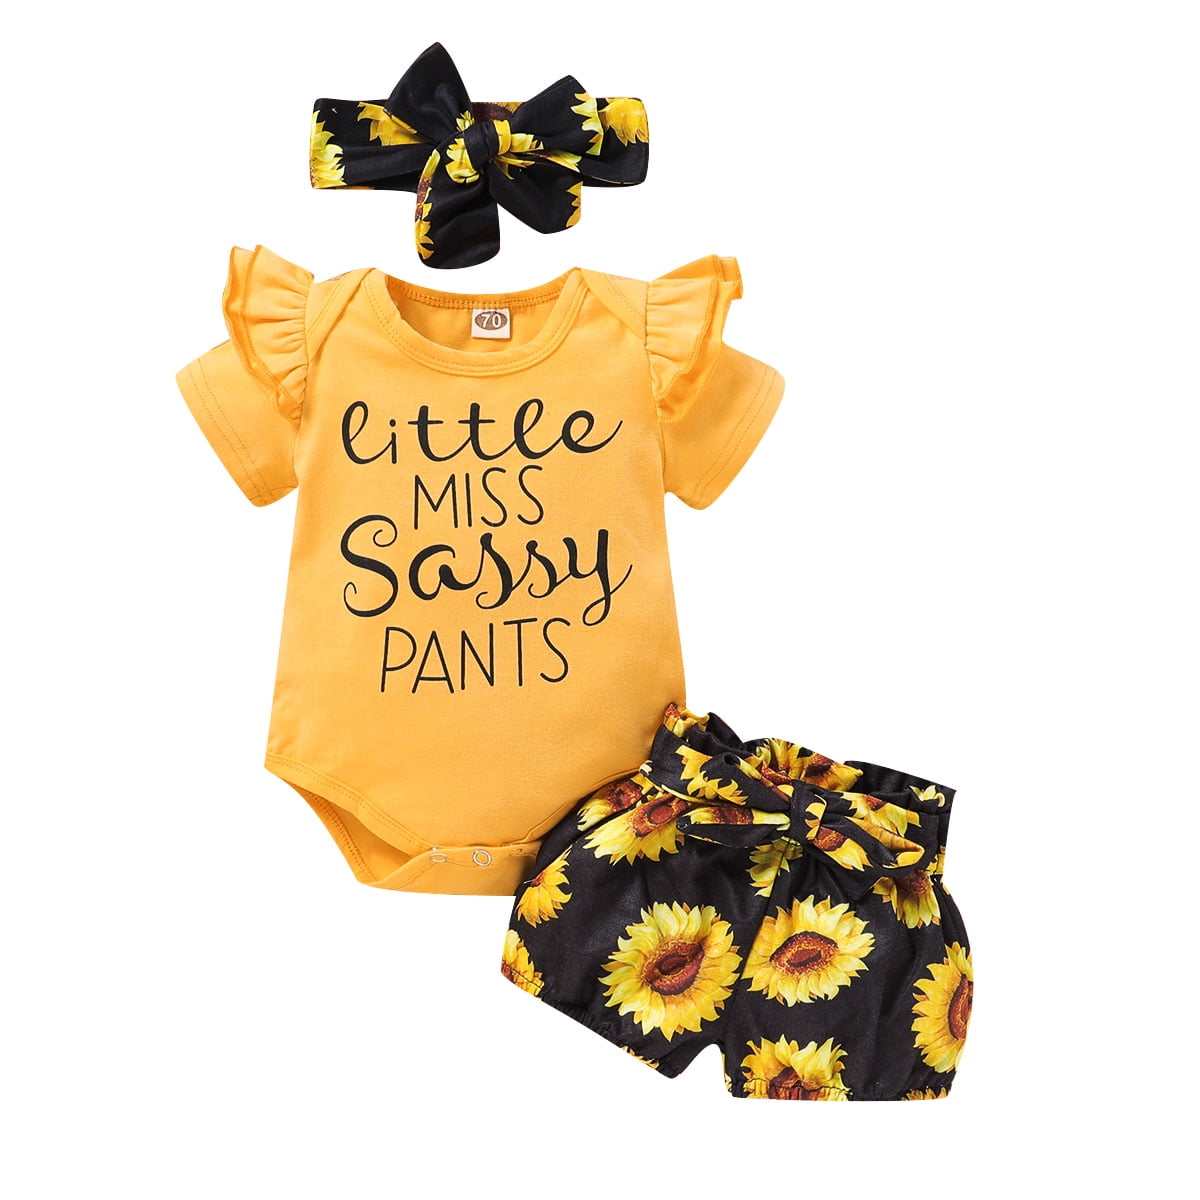 Newborn Baby Girls Clothes Set Long Fly Sleeve Romper Tops Headband Infant 3 Pieces Outfits Floral Sunflower Pants